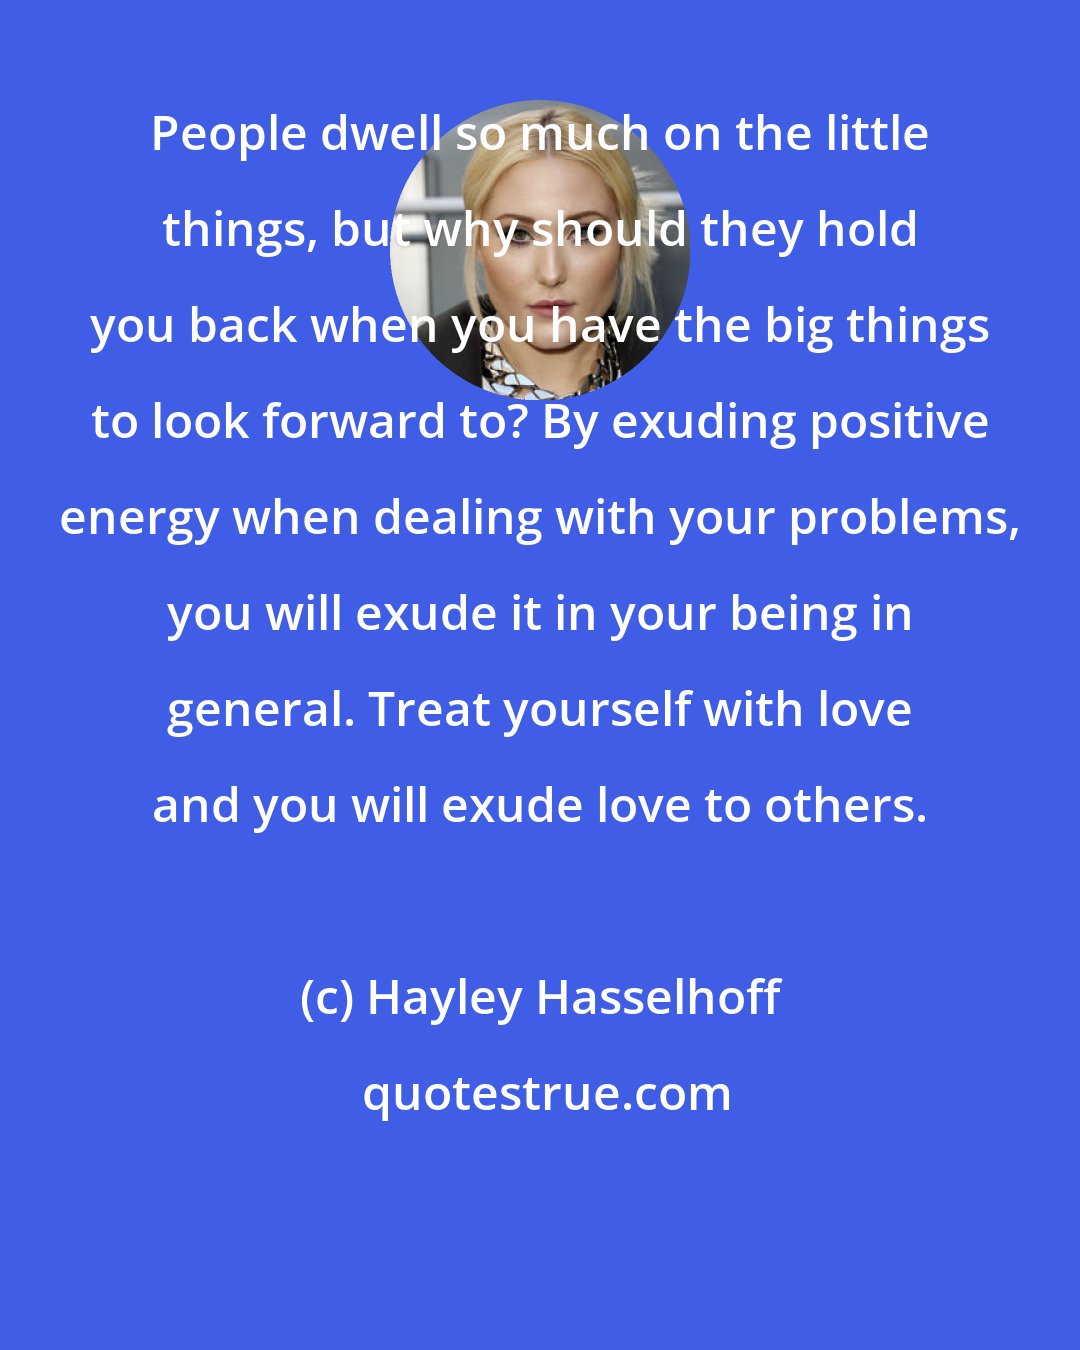 Hayley Hasselhoff: People dwell so much on the little things, but why should they hold you back when you have the big things to look forward to? By exuding positive energy when dealing with your problems, you will exude it in your being in general. Treat yourself with love and you will exude love to others.